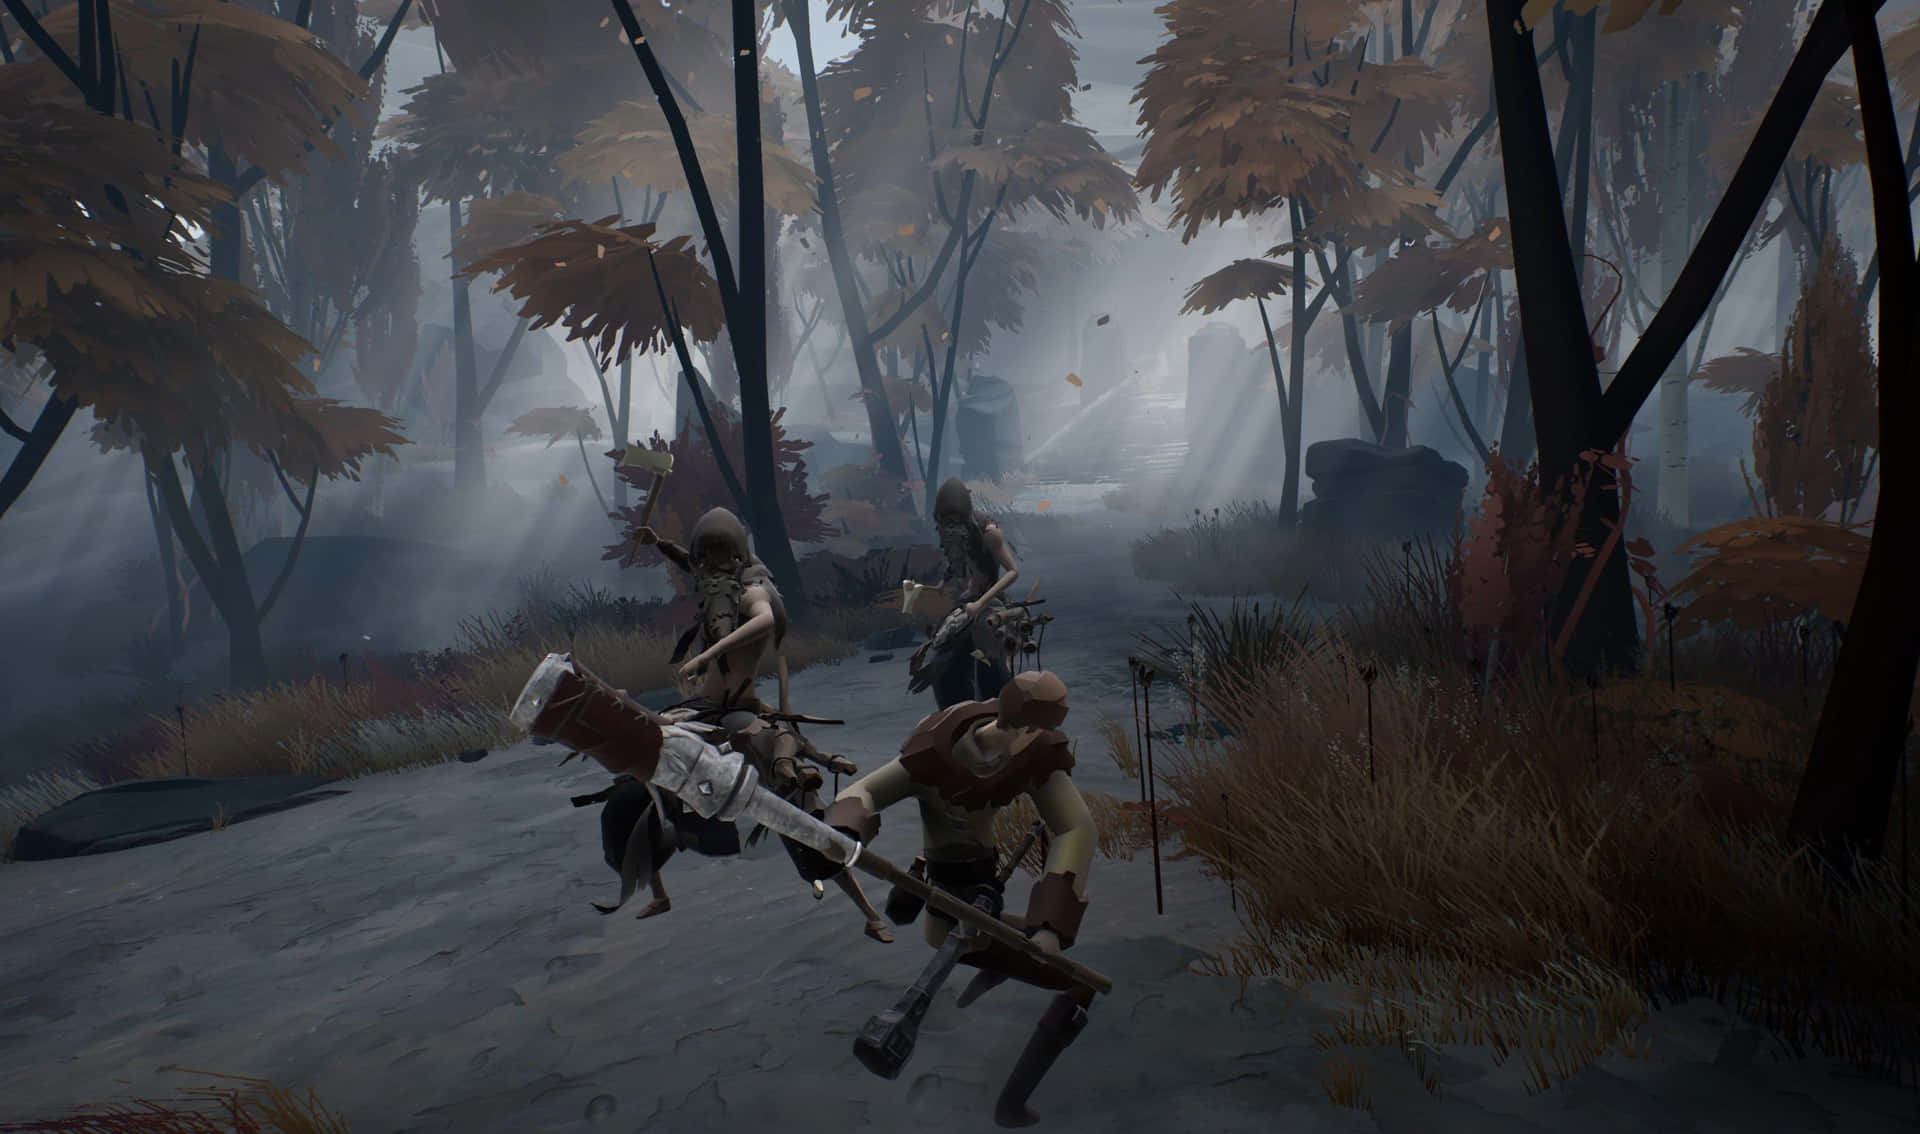 Uncover the truth in the beautiful post-apocalyptic world of Ashen Wallpaper